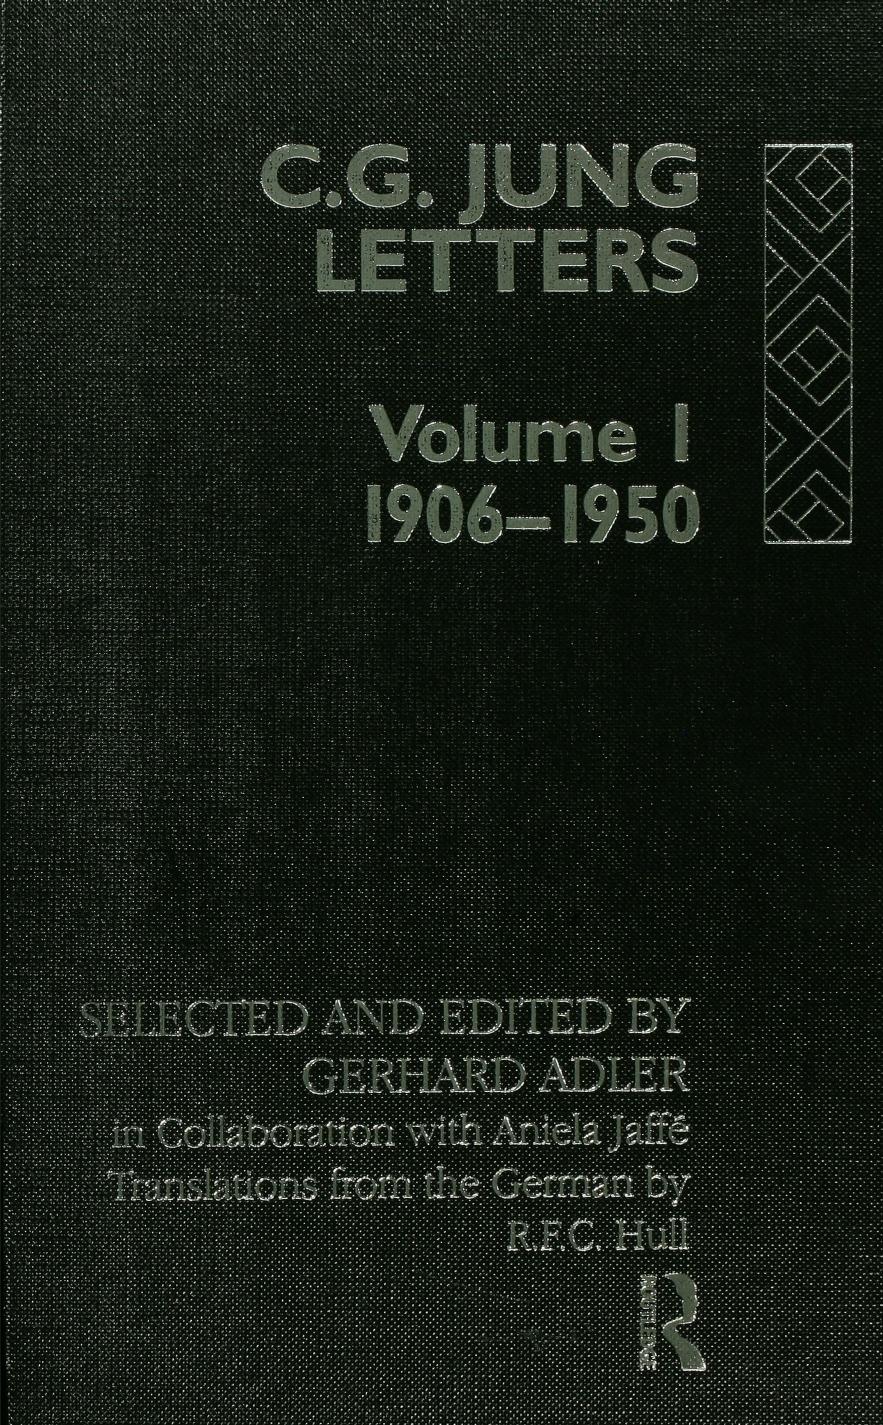 Letters of C. G. Jung: Volume 1, 1906-1950